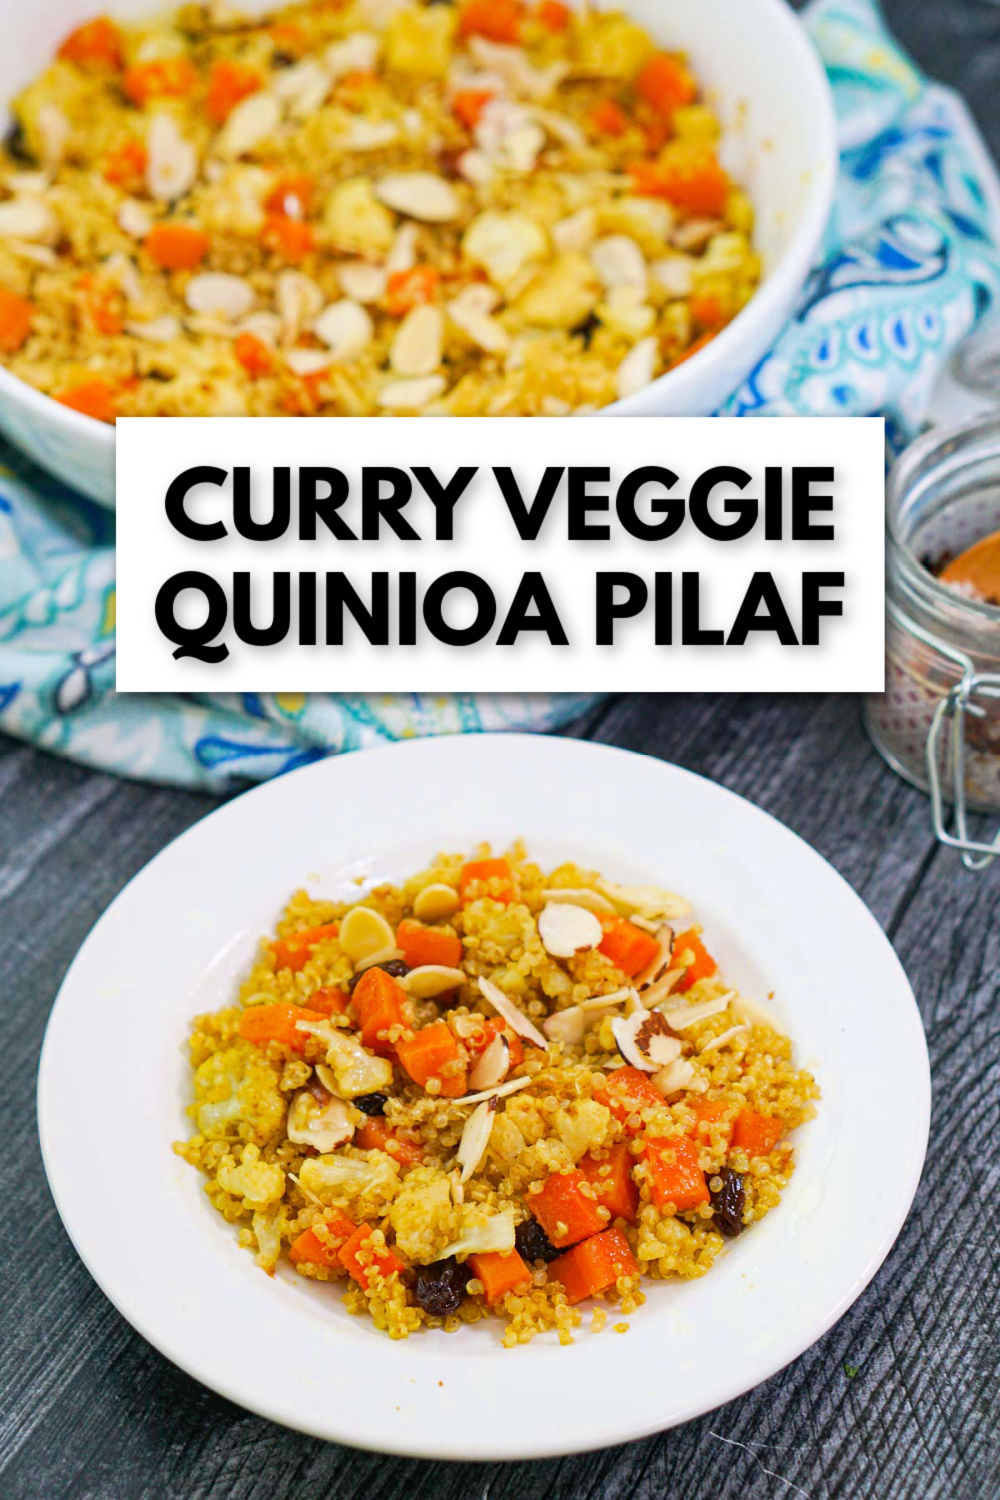 bowl and plate with vegetable curry quinoa and text